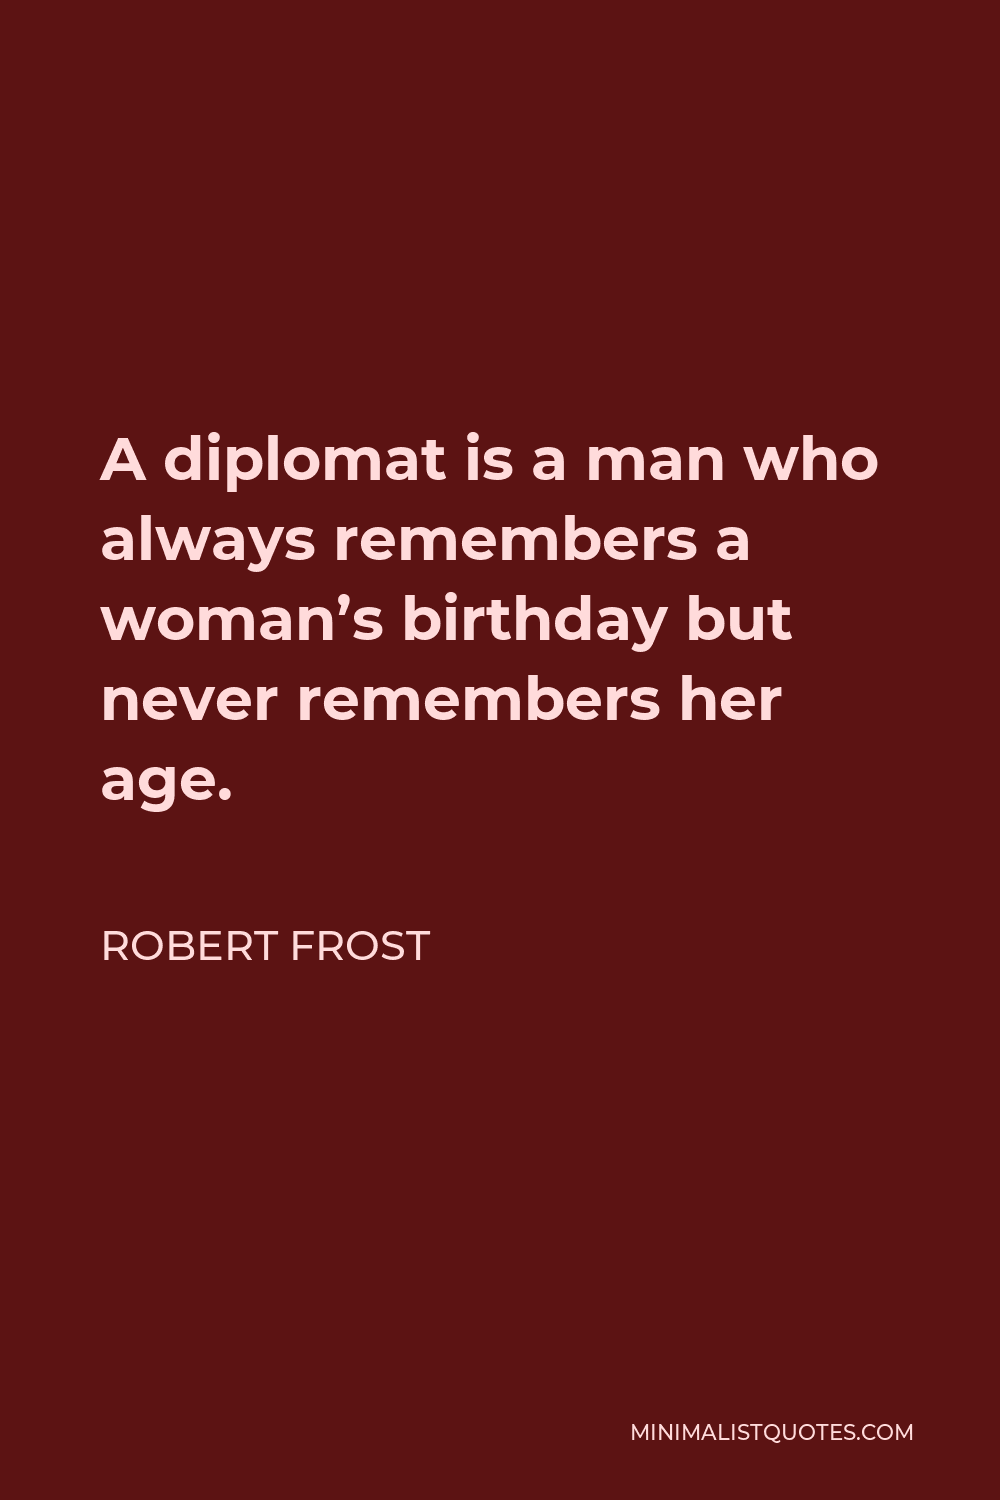 Robert Frost Quote - A diplomat is a man who always remembers a woman’s birthday but never remembers her age.